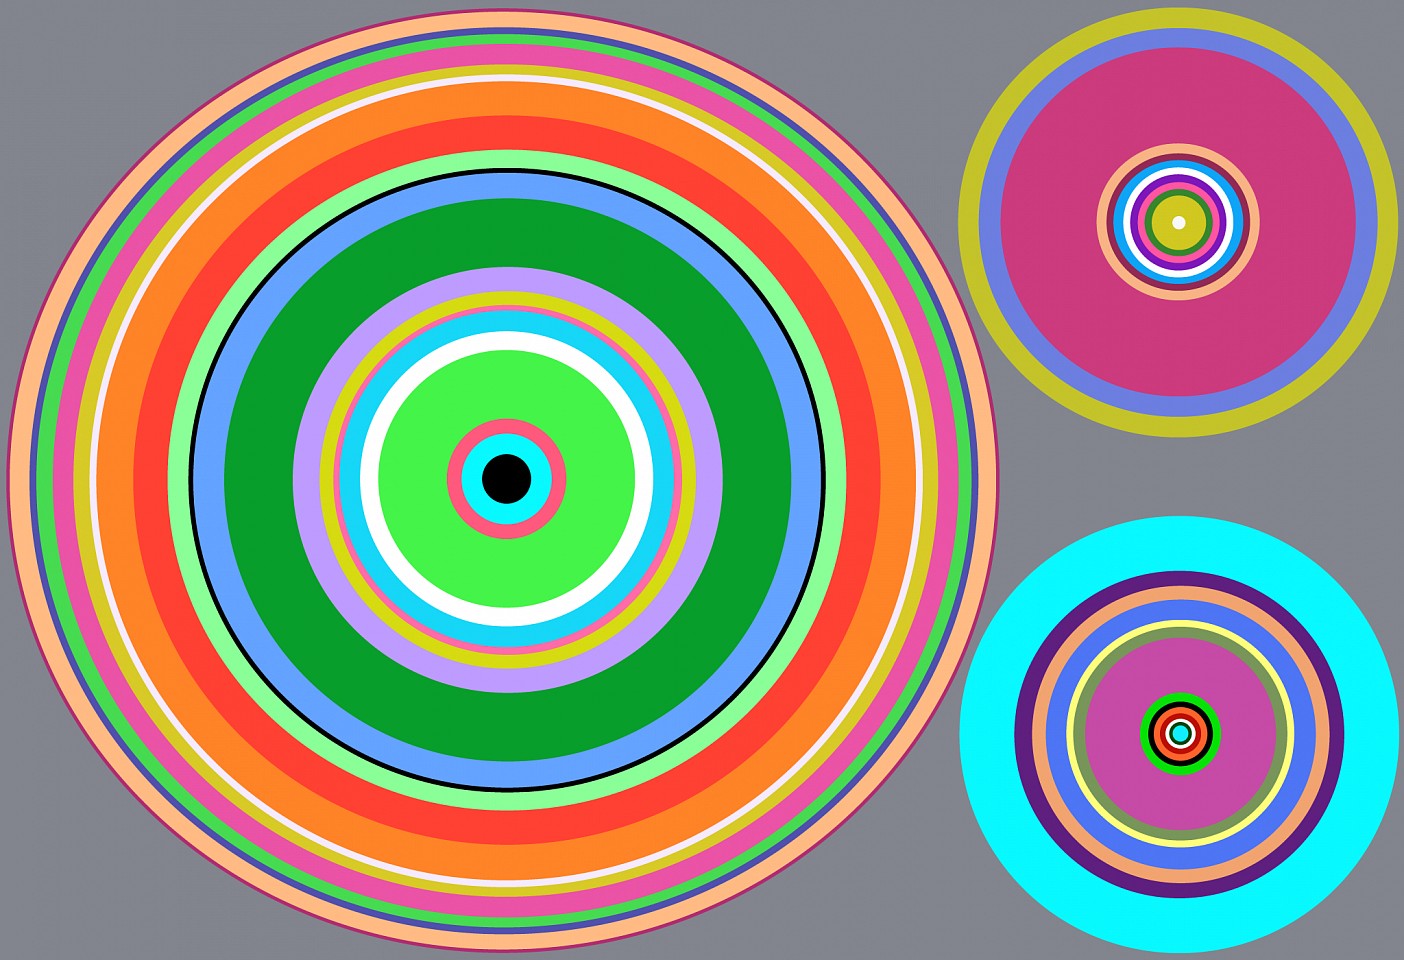 Dane Albert, Circles #26 Dusk, 2023
Acrylic on canvas (Concept), 48 x 72 in. (121.9 x 182.9 cm)
Series of colored lines and shapes in multiple configurations
DA.2023-026-dusk